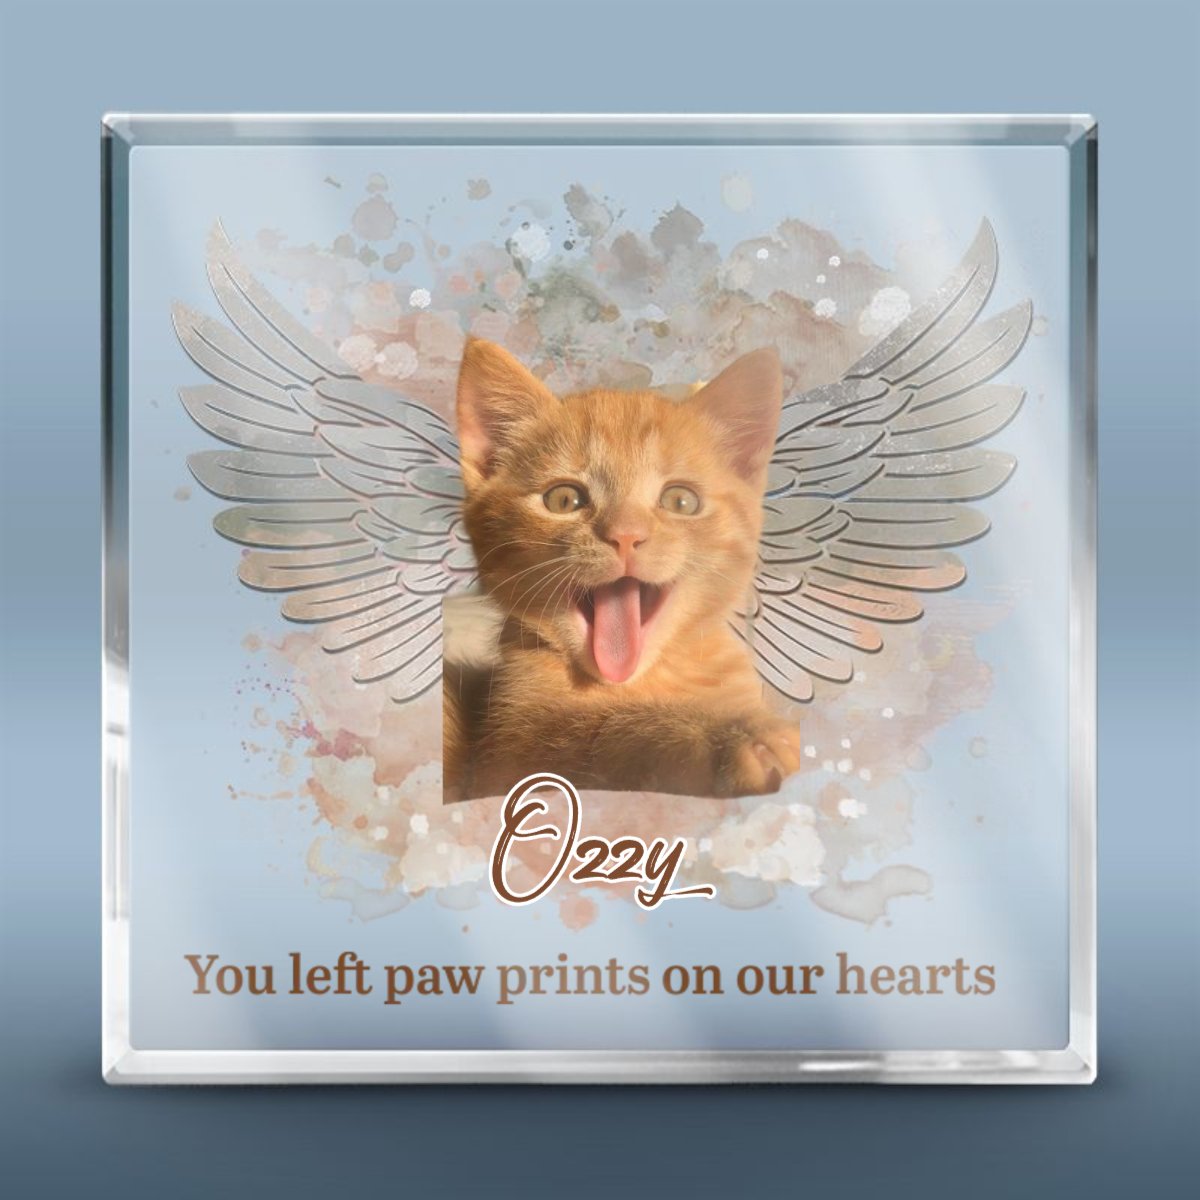 Pet Lovers - Pets Teach Us The Purest Kind Of Love - Memorial Personalized Custom Square Shaped Acrylic Plaque - The Next Custom Gift